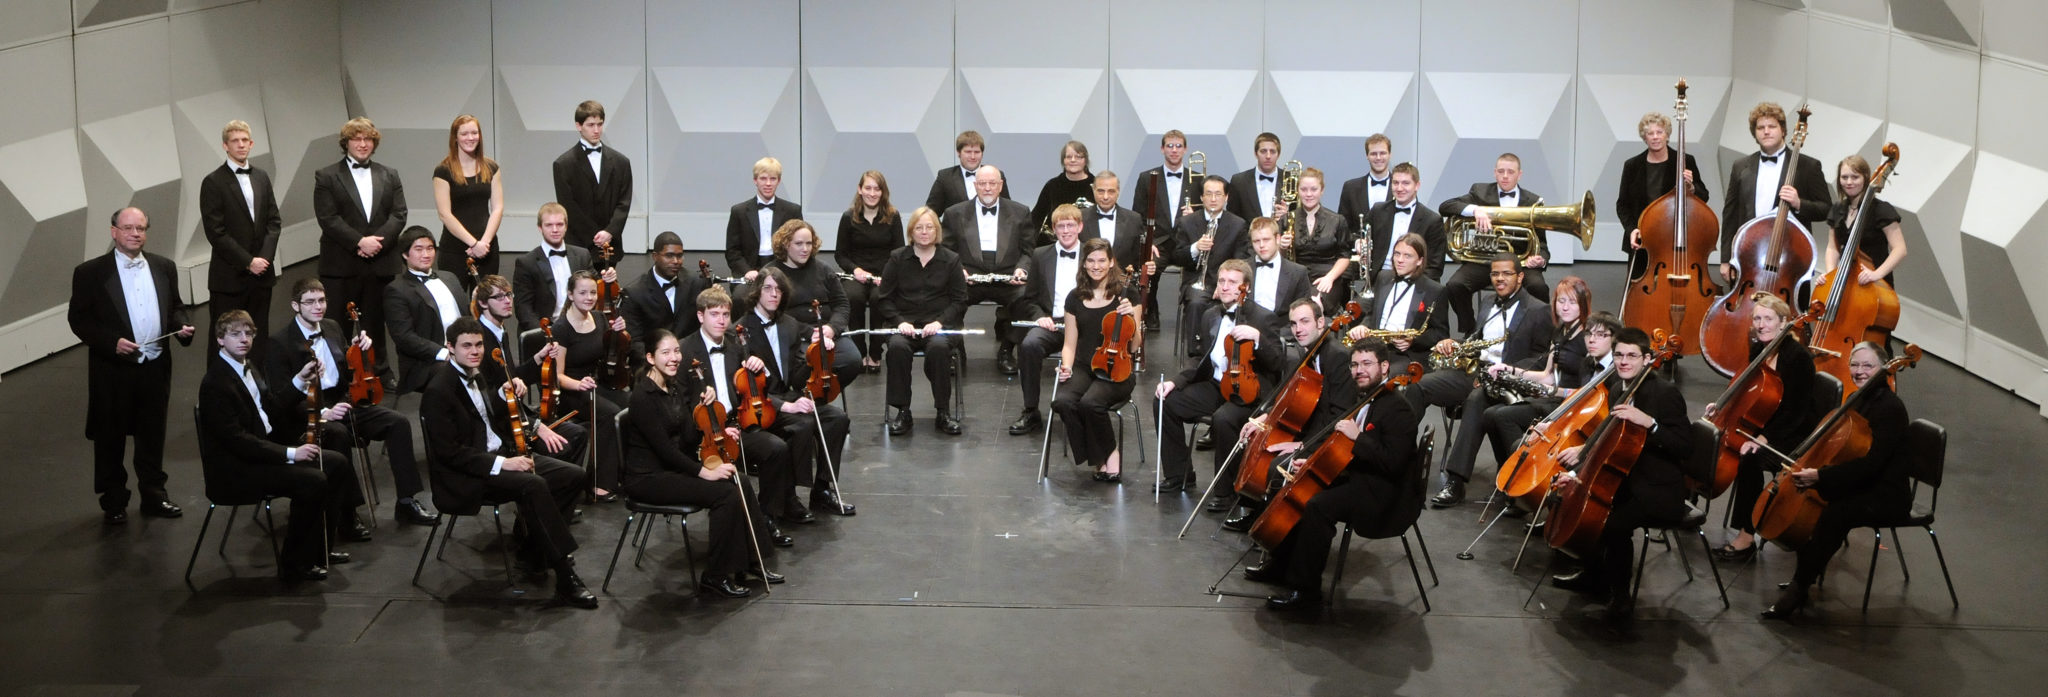 Missouri S&T – News and Events – Missouri S&T orchestras to perform May 3